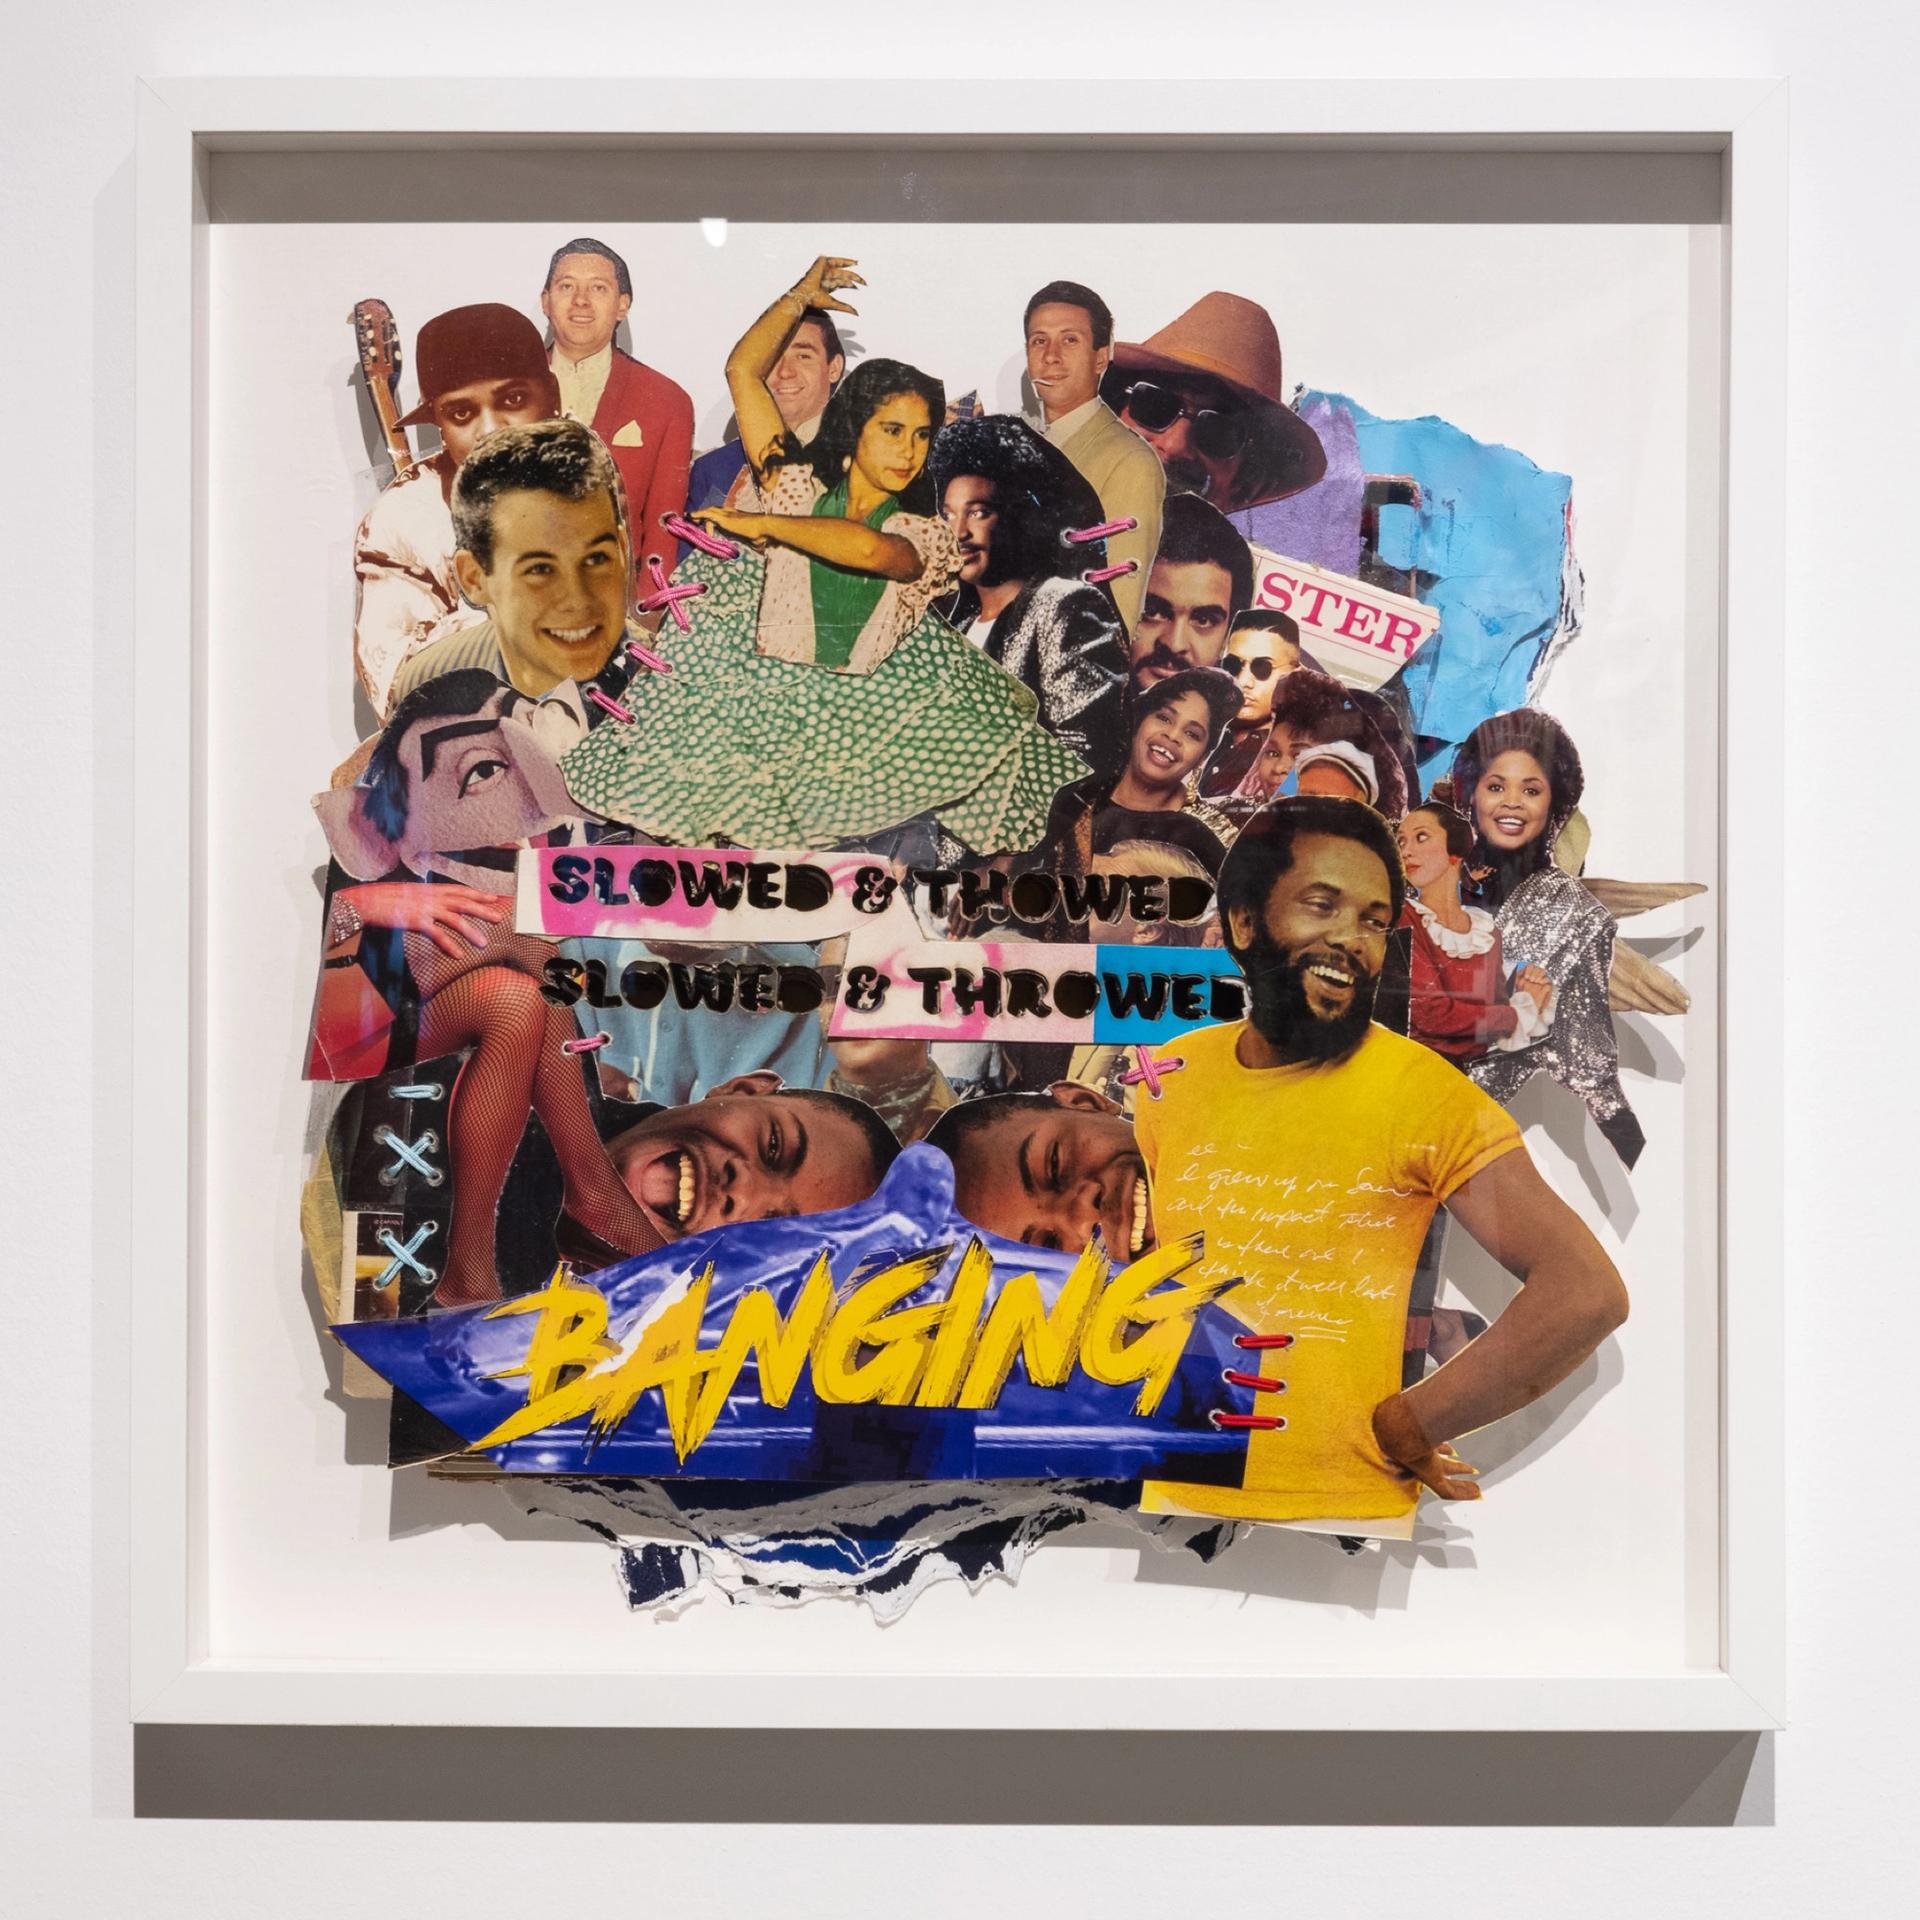 Mixed media collage by Robert Hodge, in "Slowed and Throwed: Records of the City Through Mutated Lenses." Photo: Emily Peacock, 2020; courtesy of the Contemporary Arts Museum Houston (CAMH)